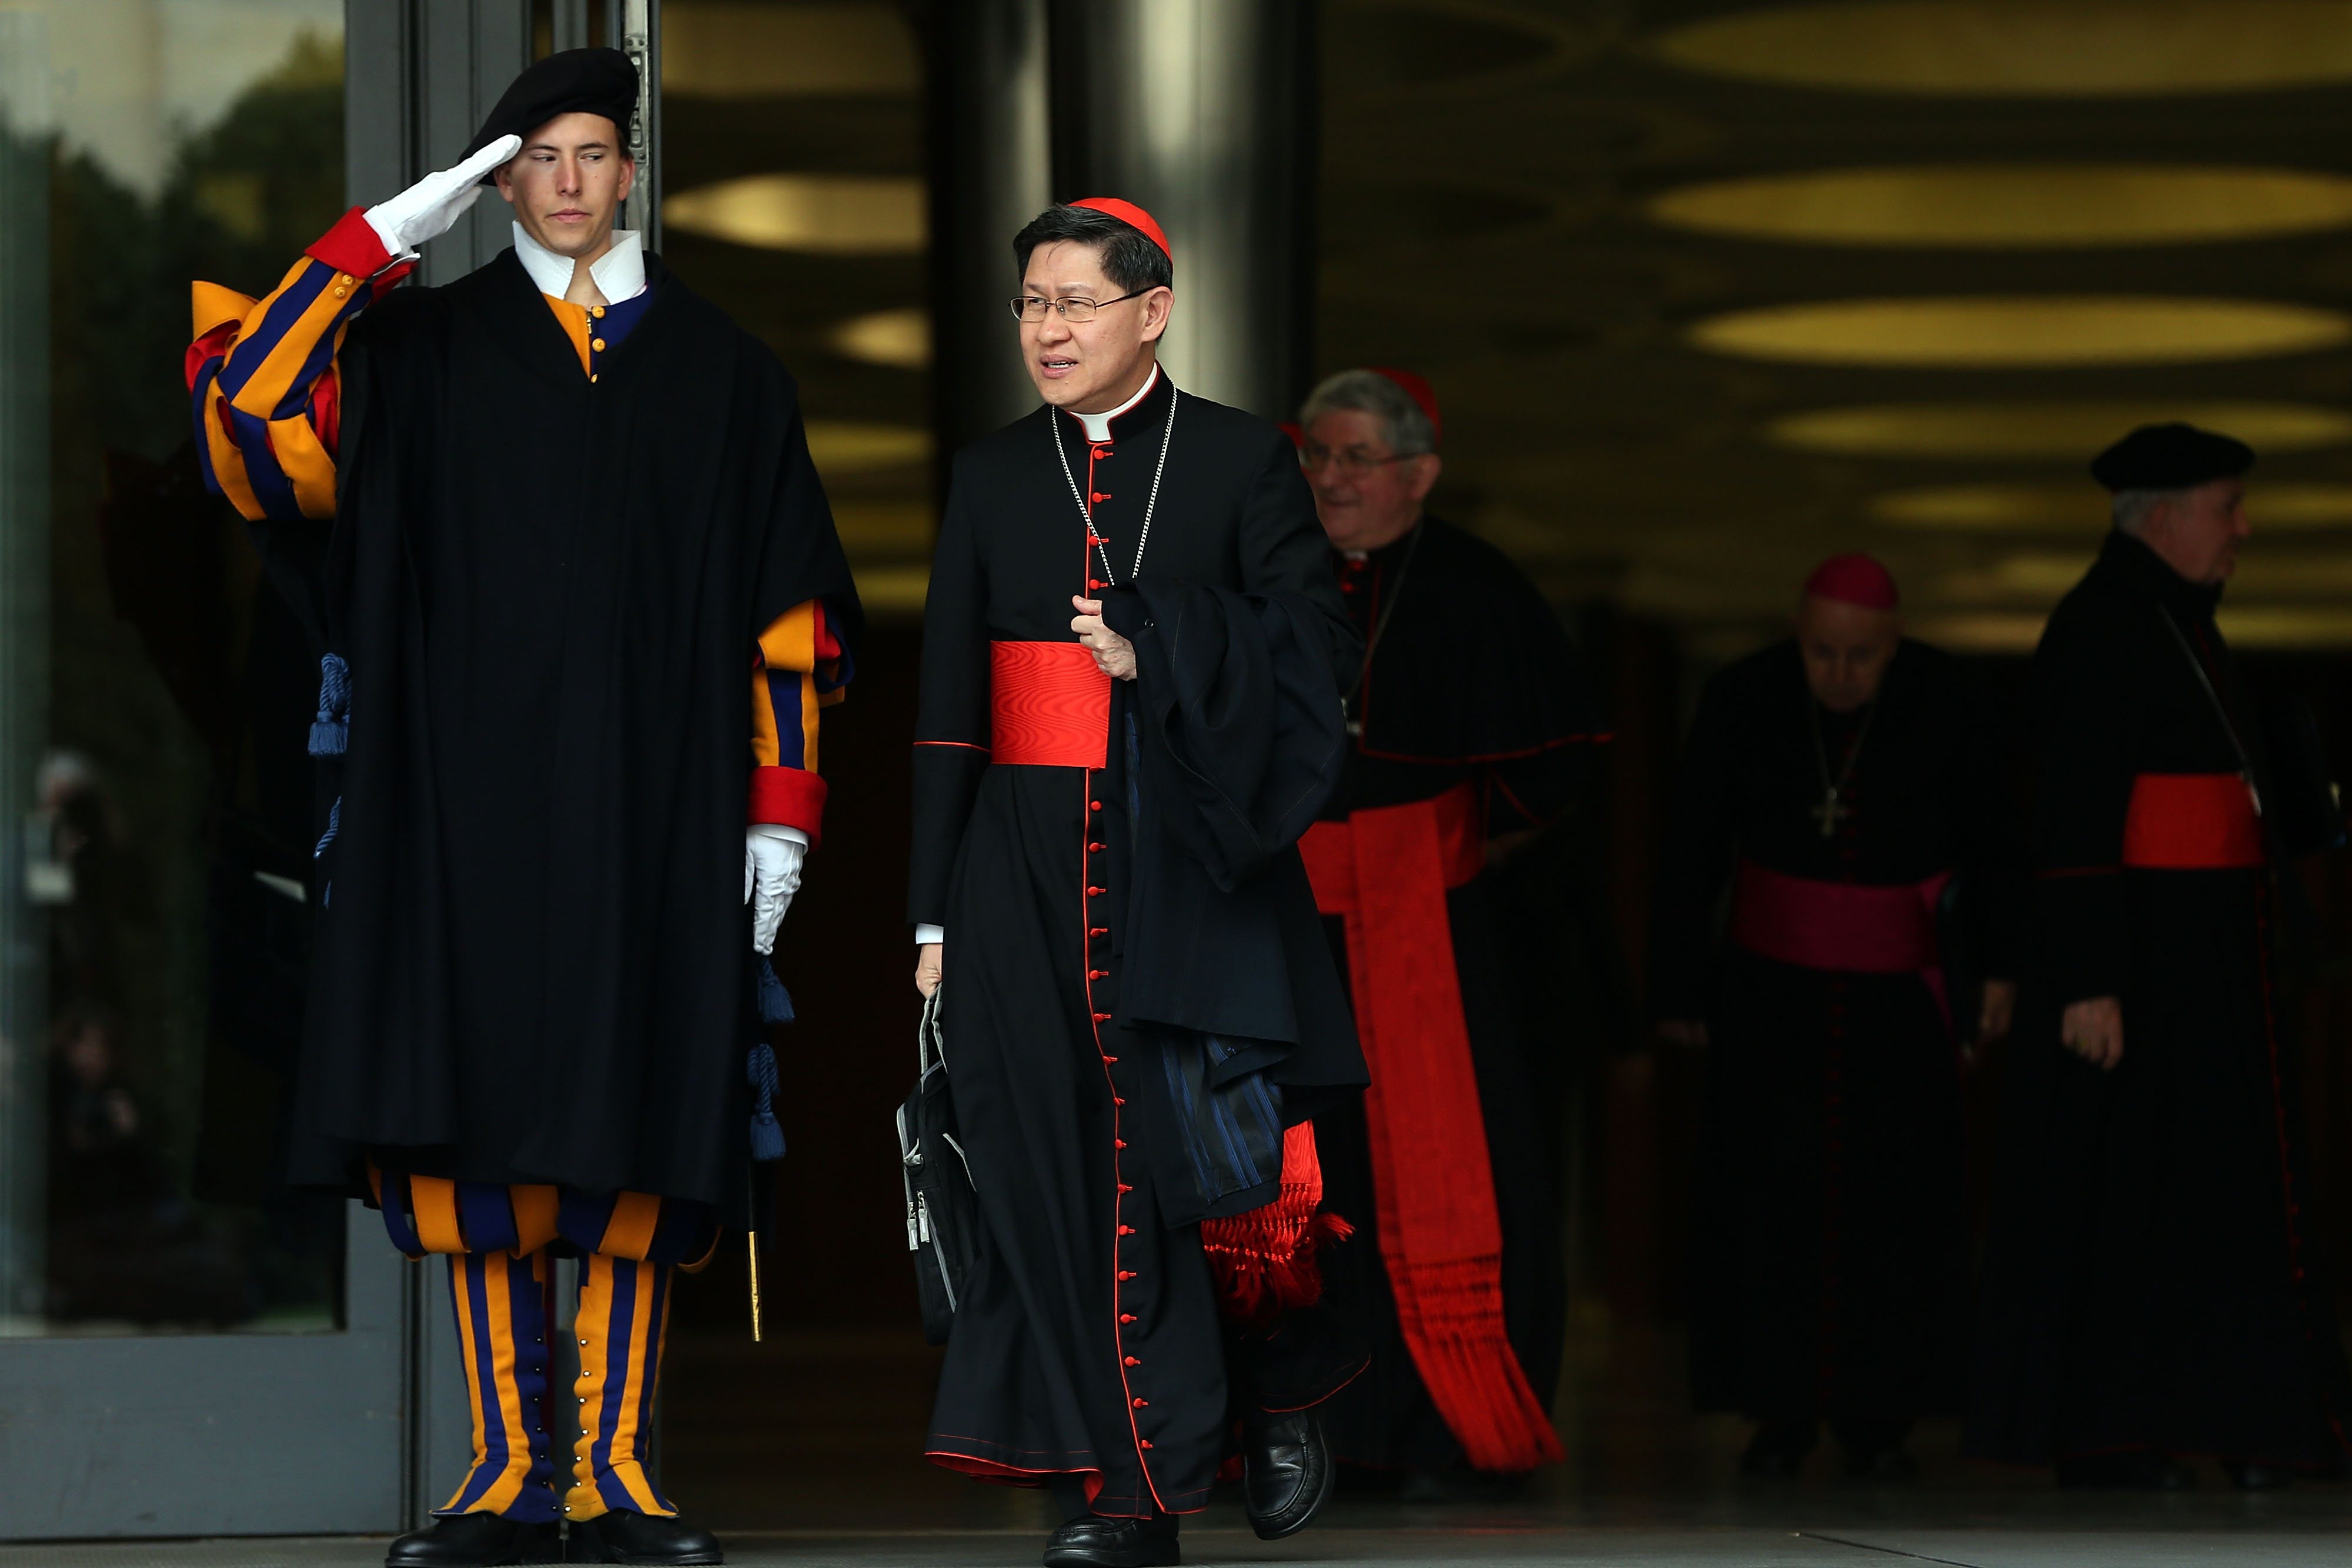 Pope Francis Leads Extraordinary Consistory